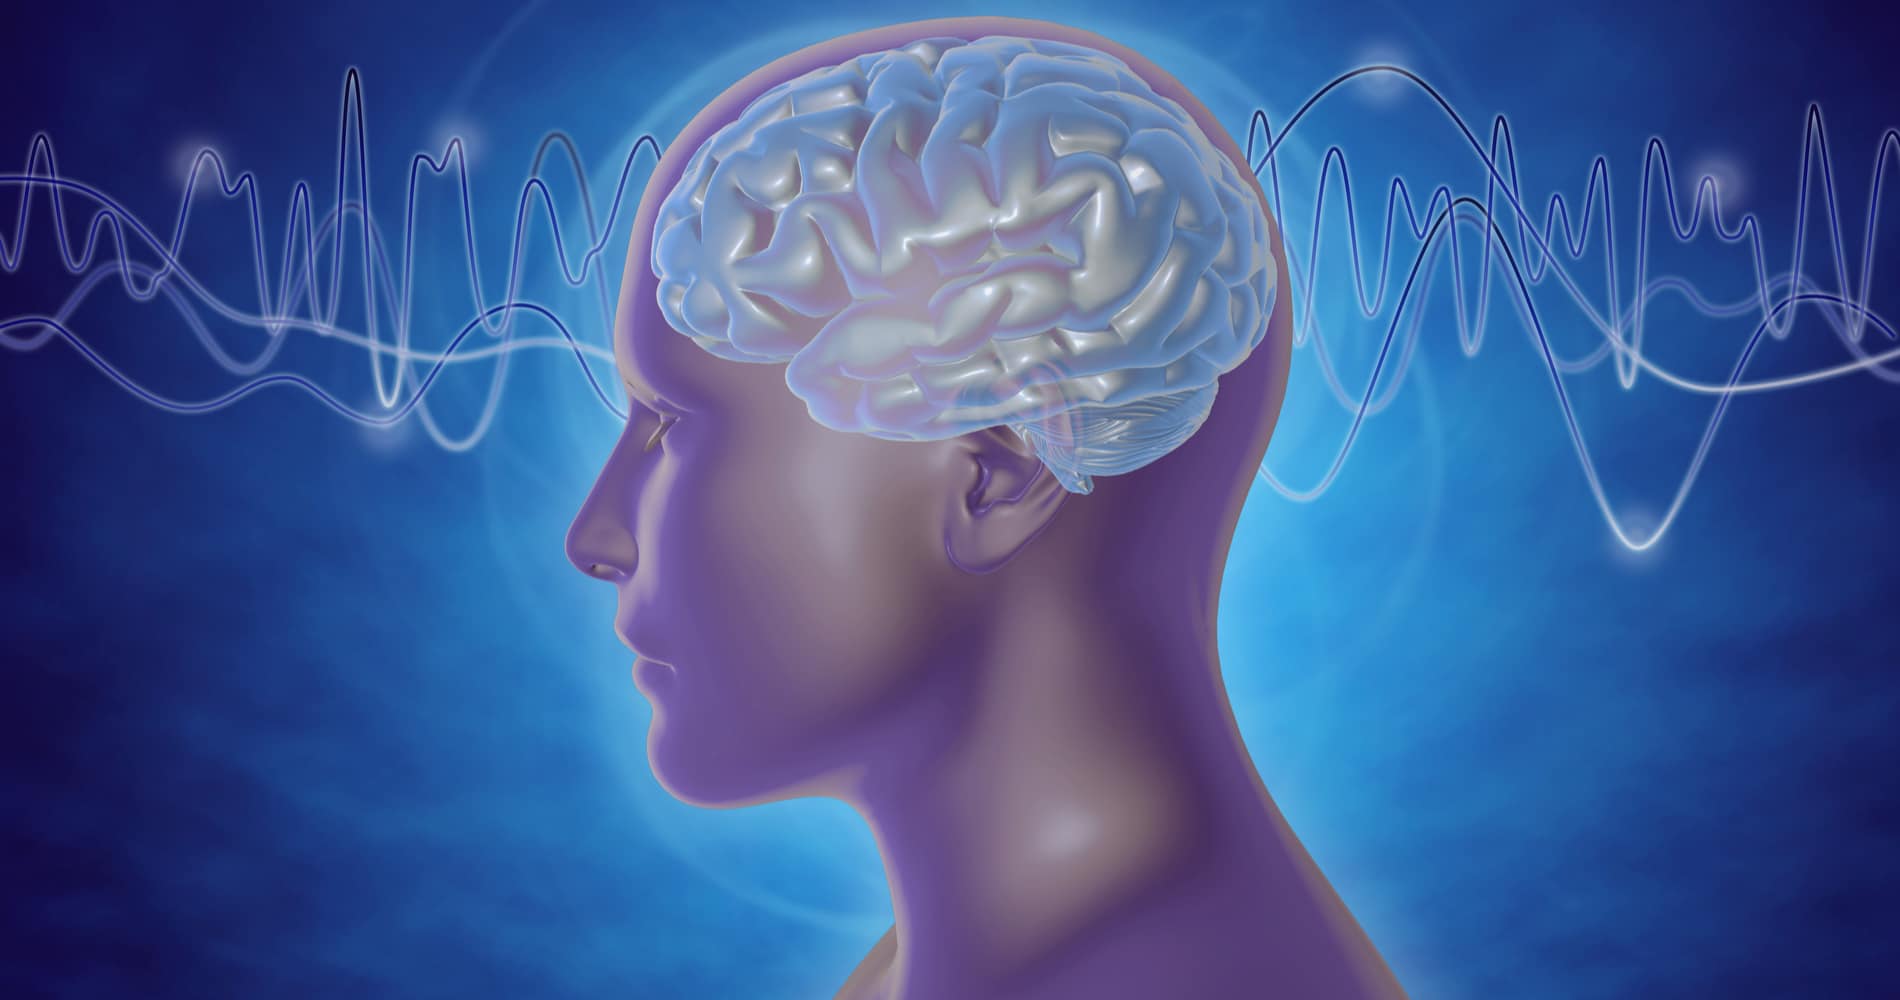 The Ultimate Brain Wave Music MP3 Library - The Brain Garage